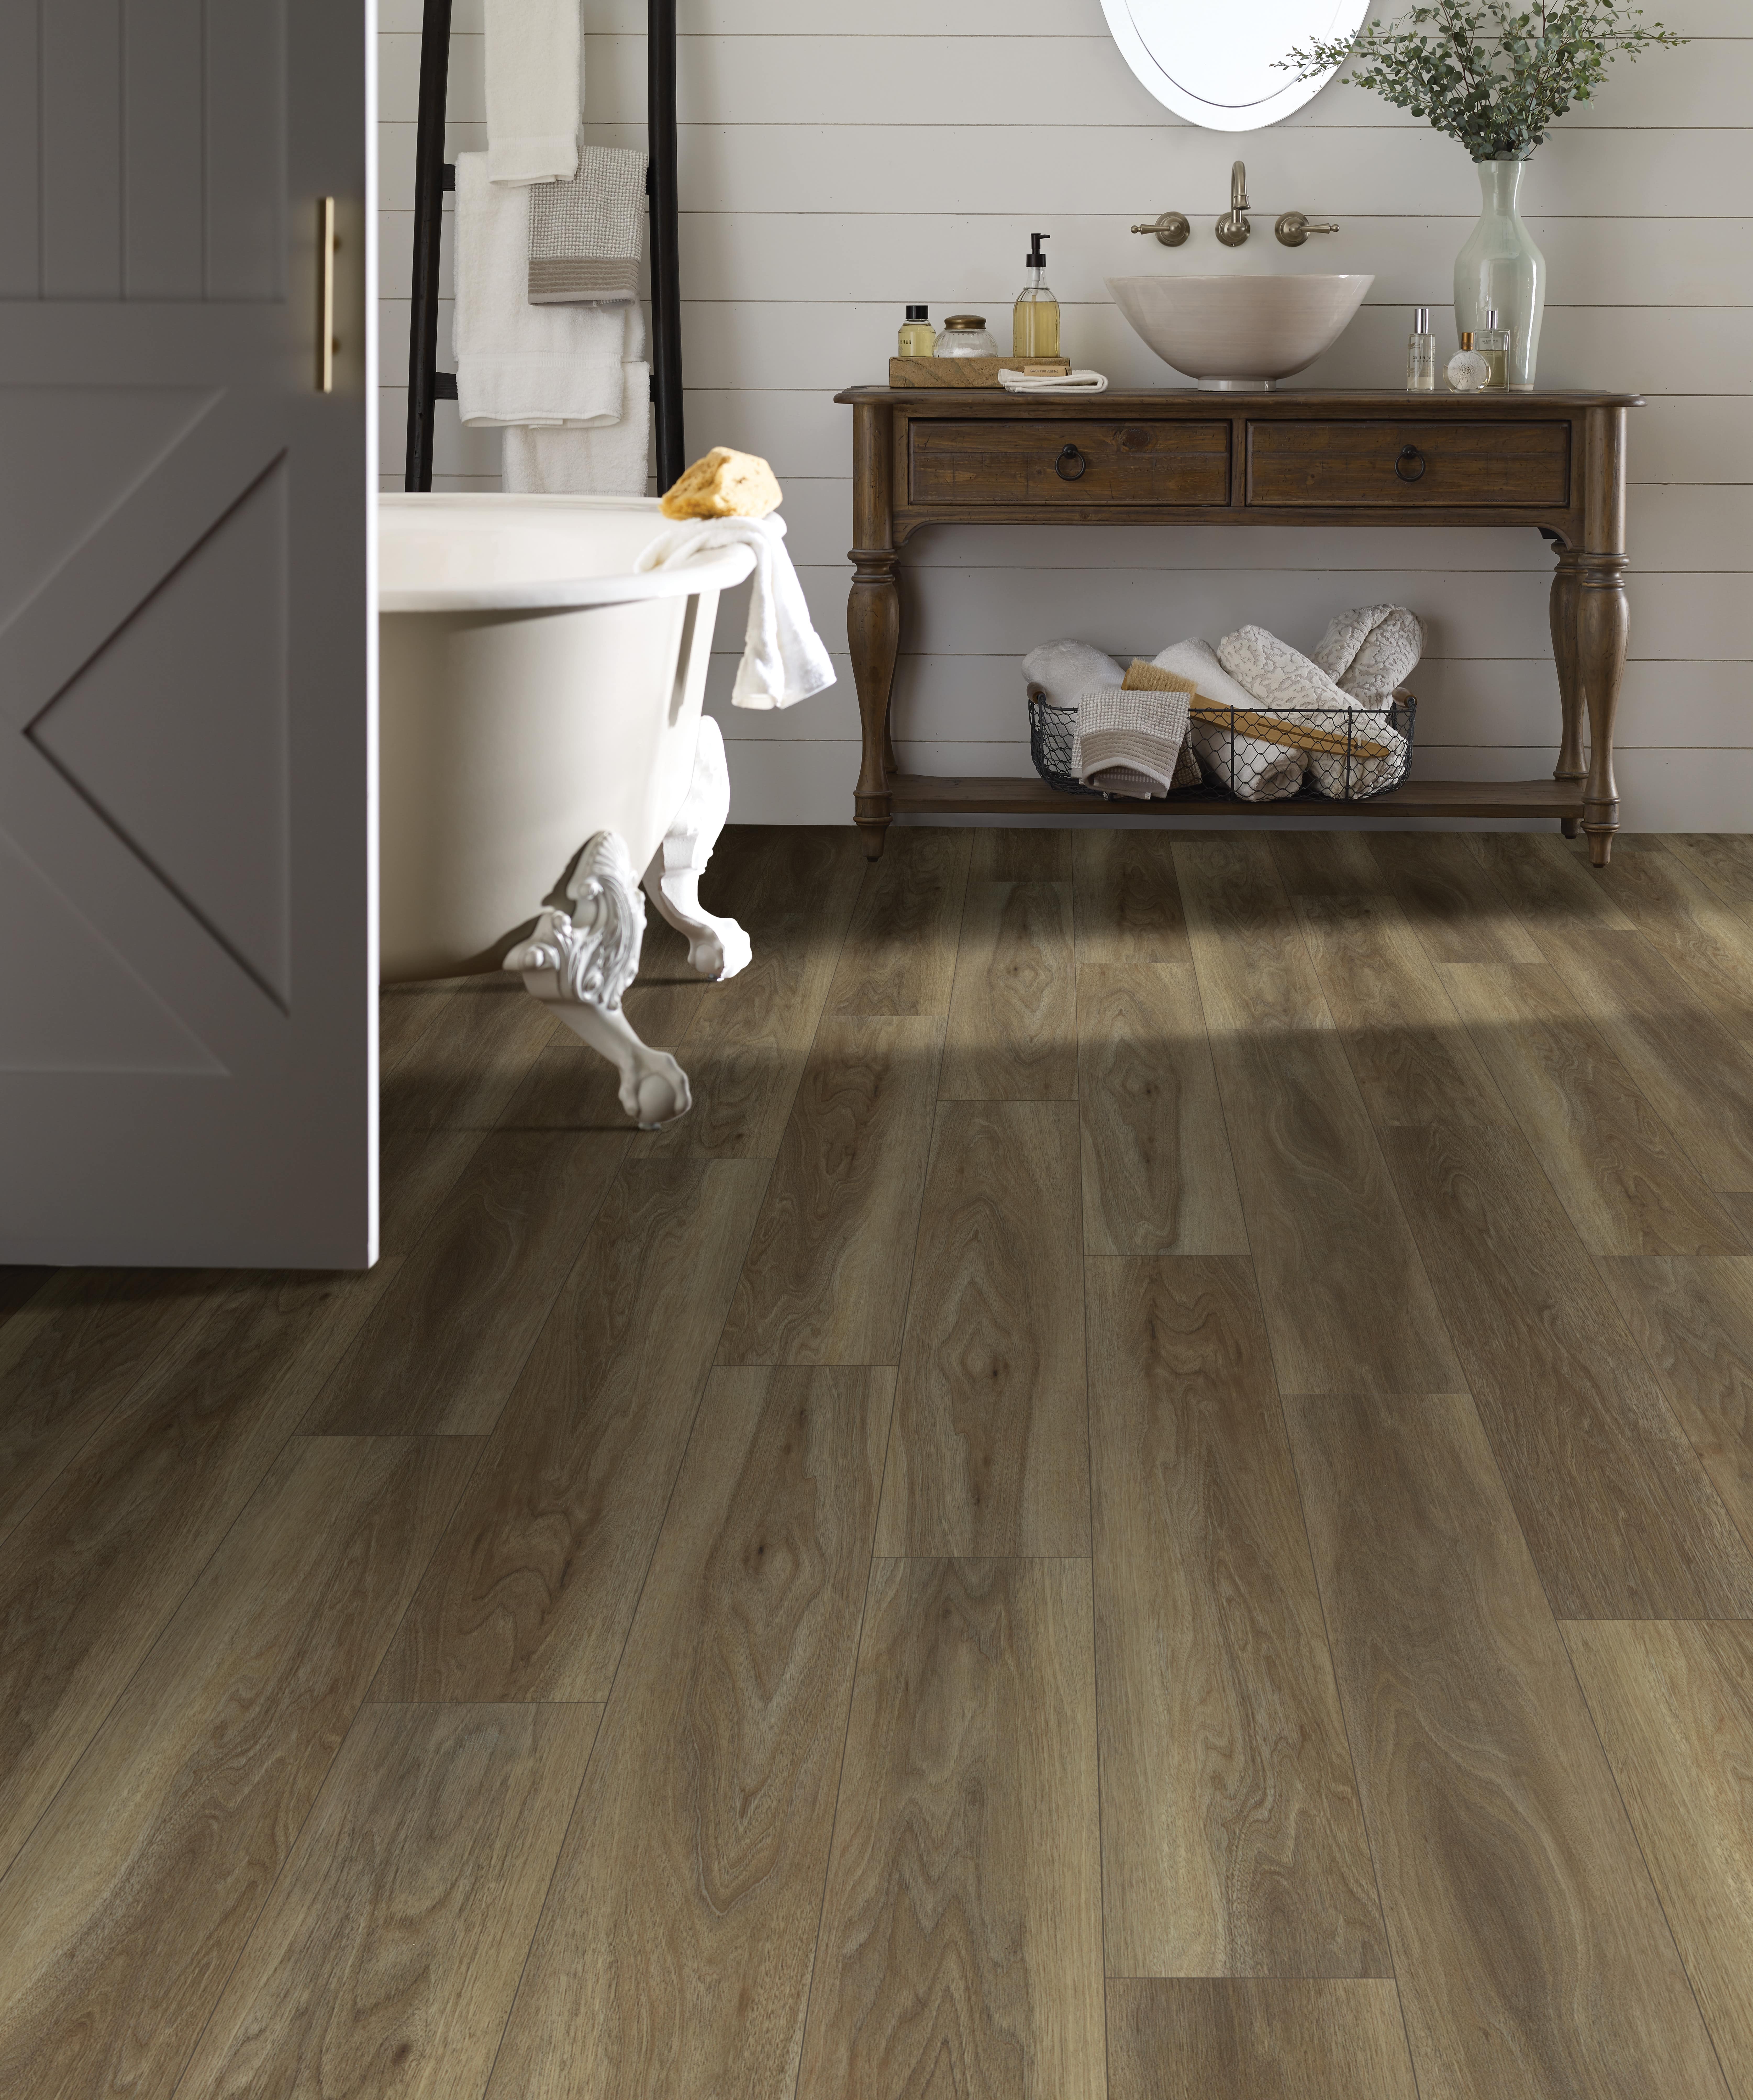 Wood Floor Bathrooms How To Do Them, How To Install Laminate Wood Floor In Bathroom